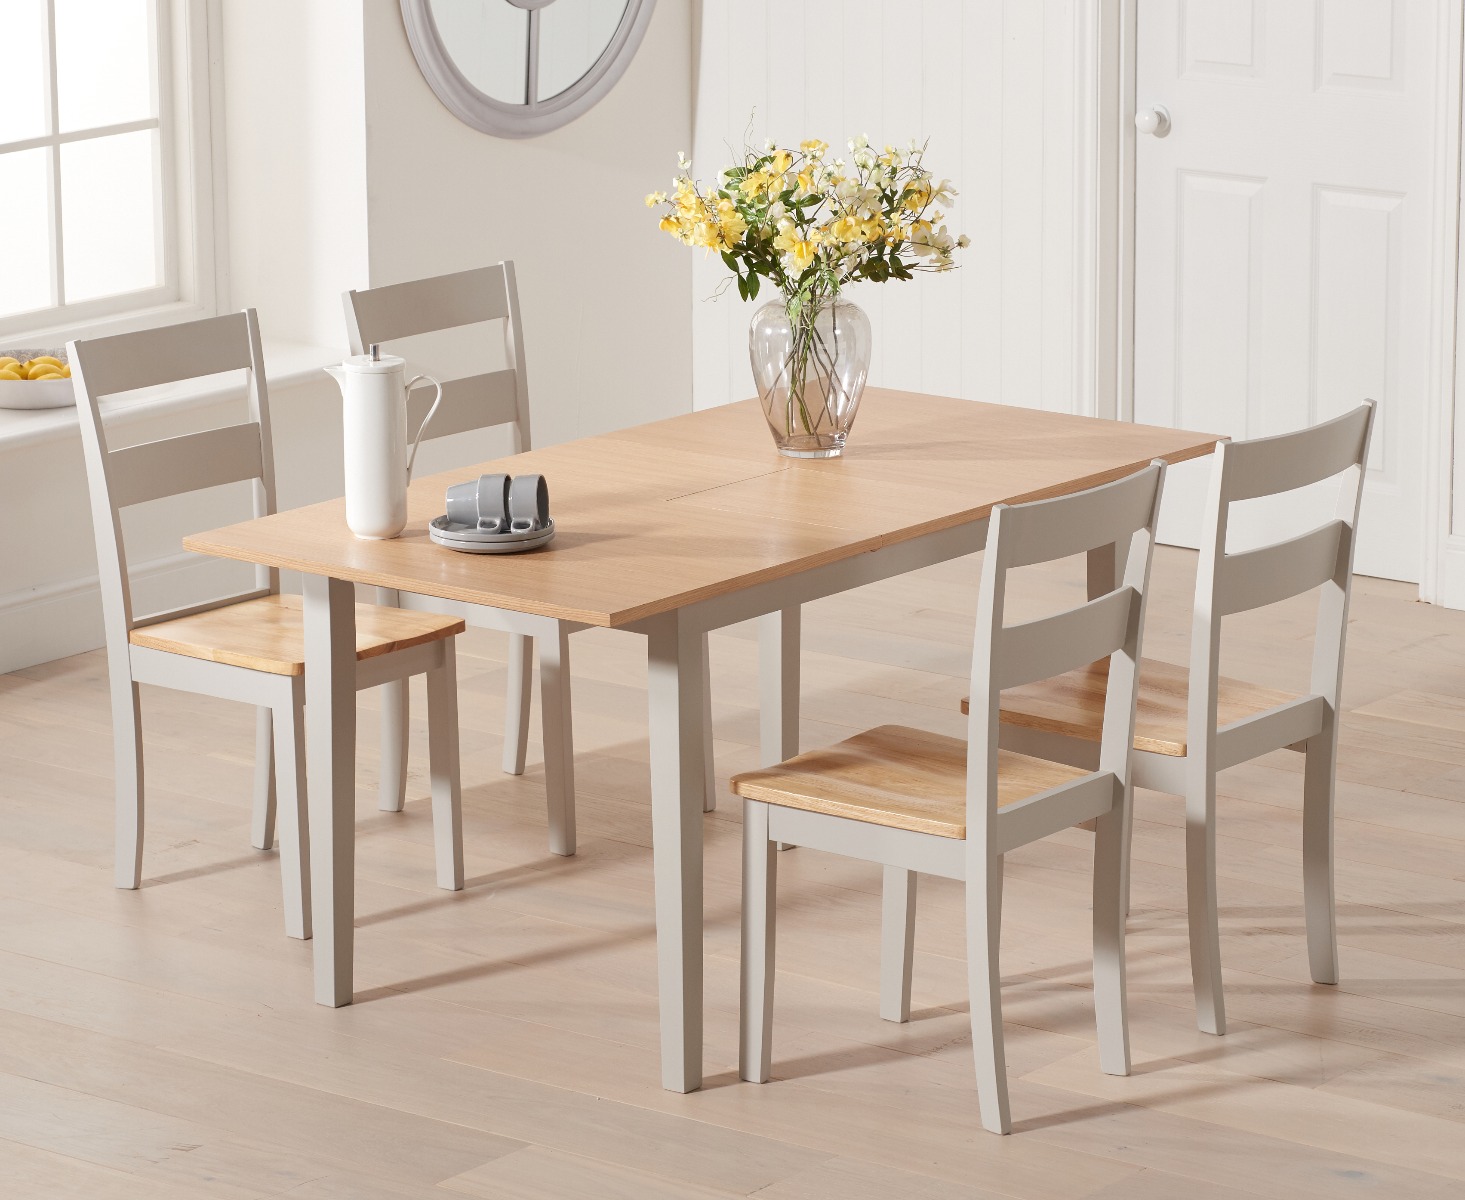 Chiltern 120cm Extending Grey And Oak Painted Table With 4 Oak And Grey Chiltern Chairs